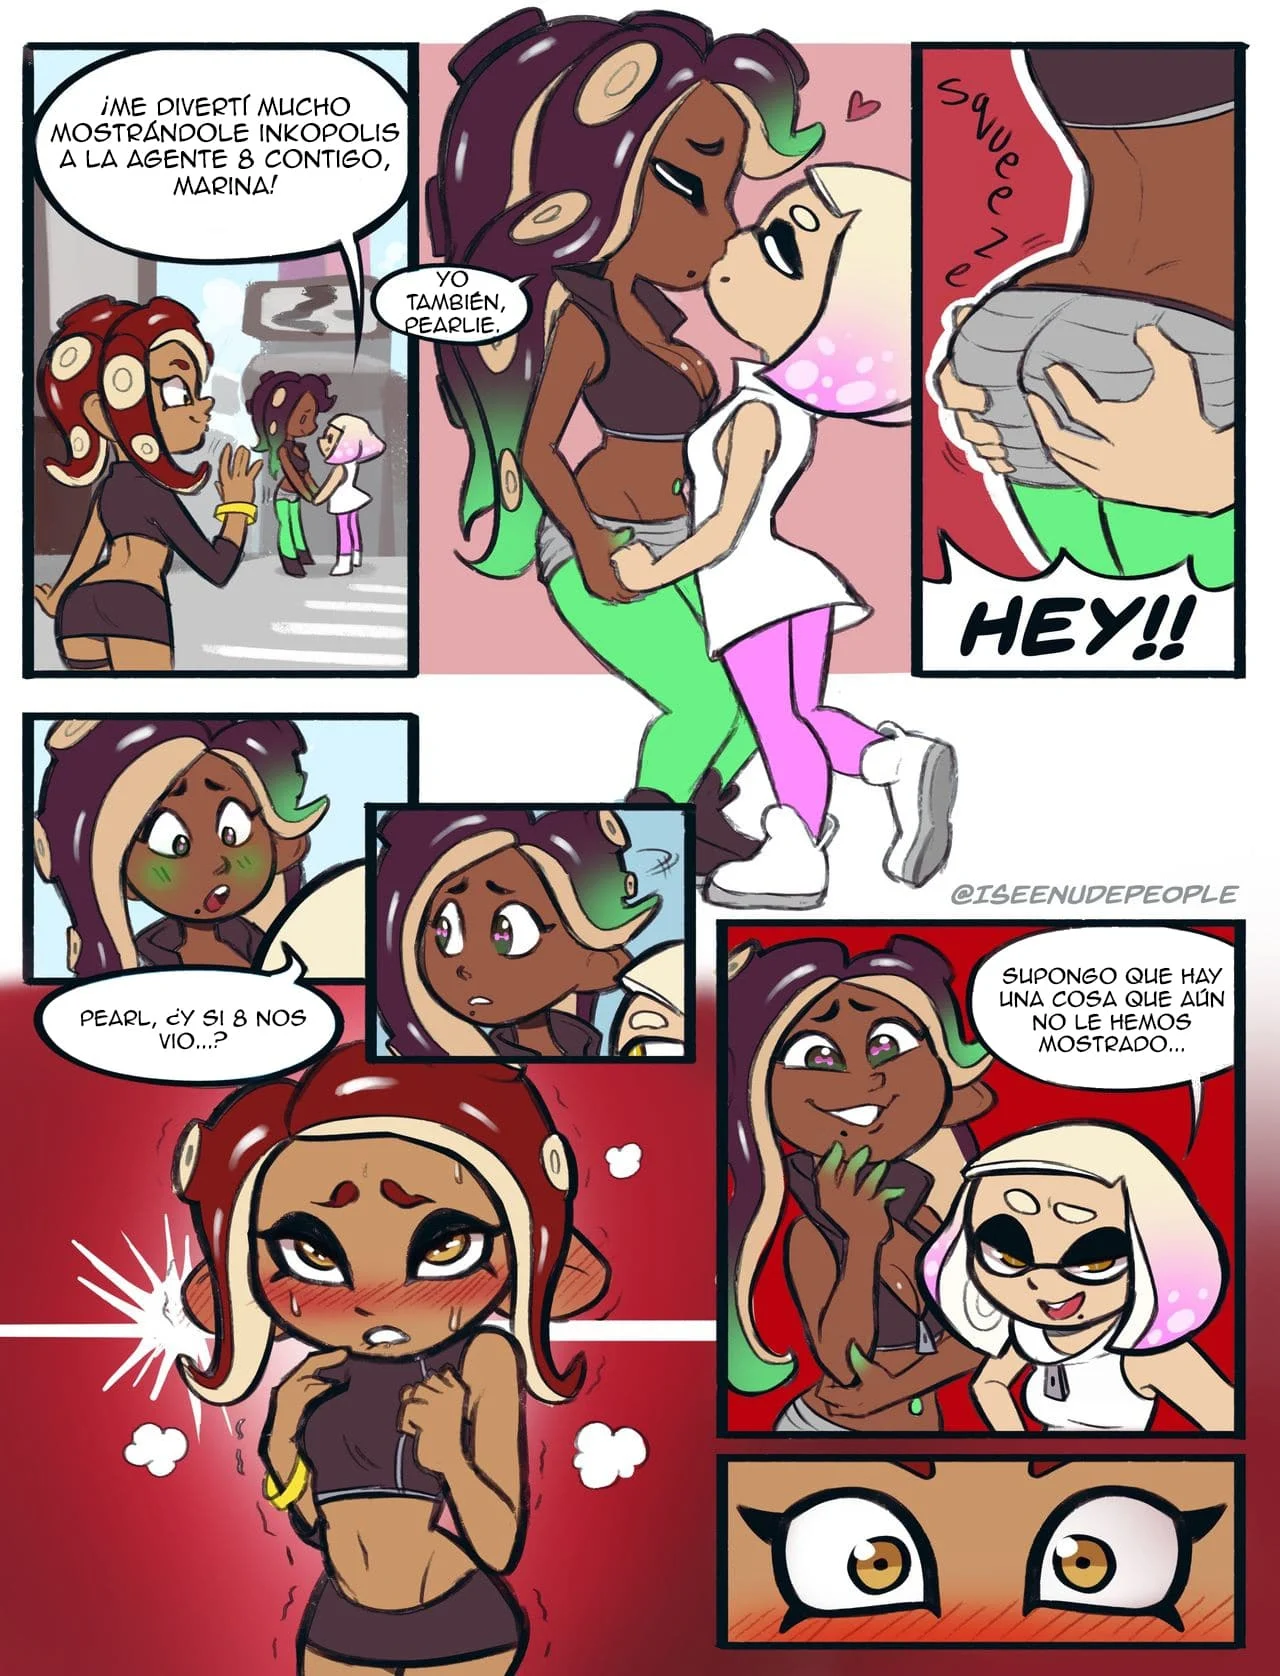 A Date with 8 – Splatoon